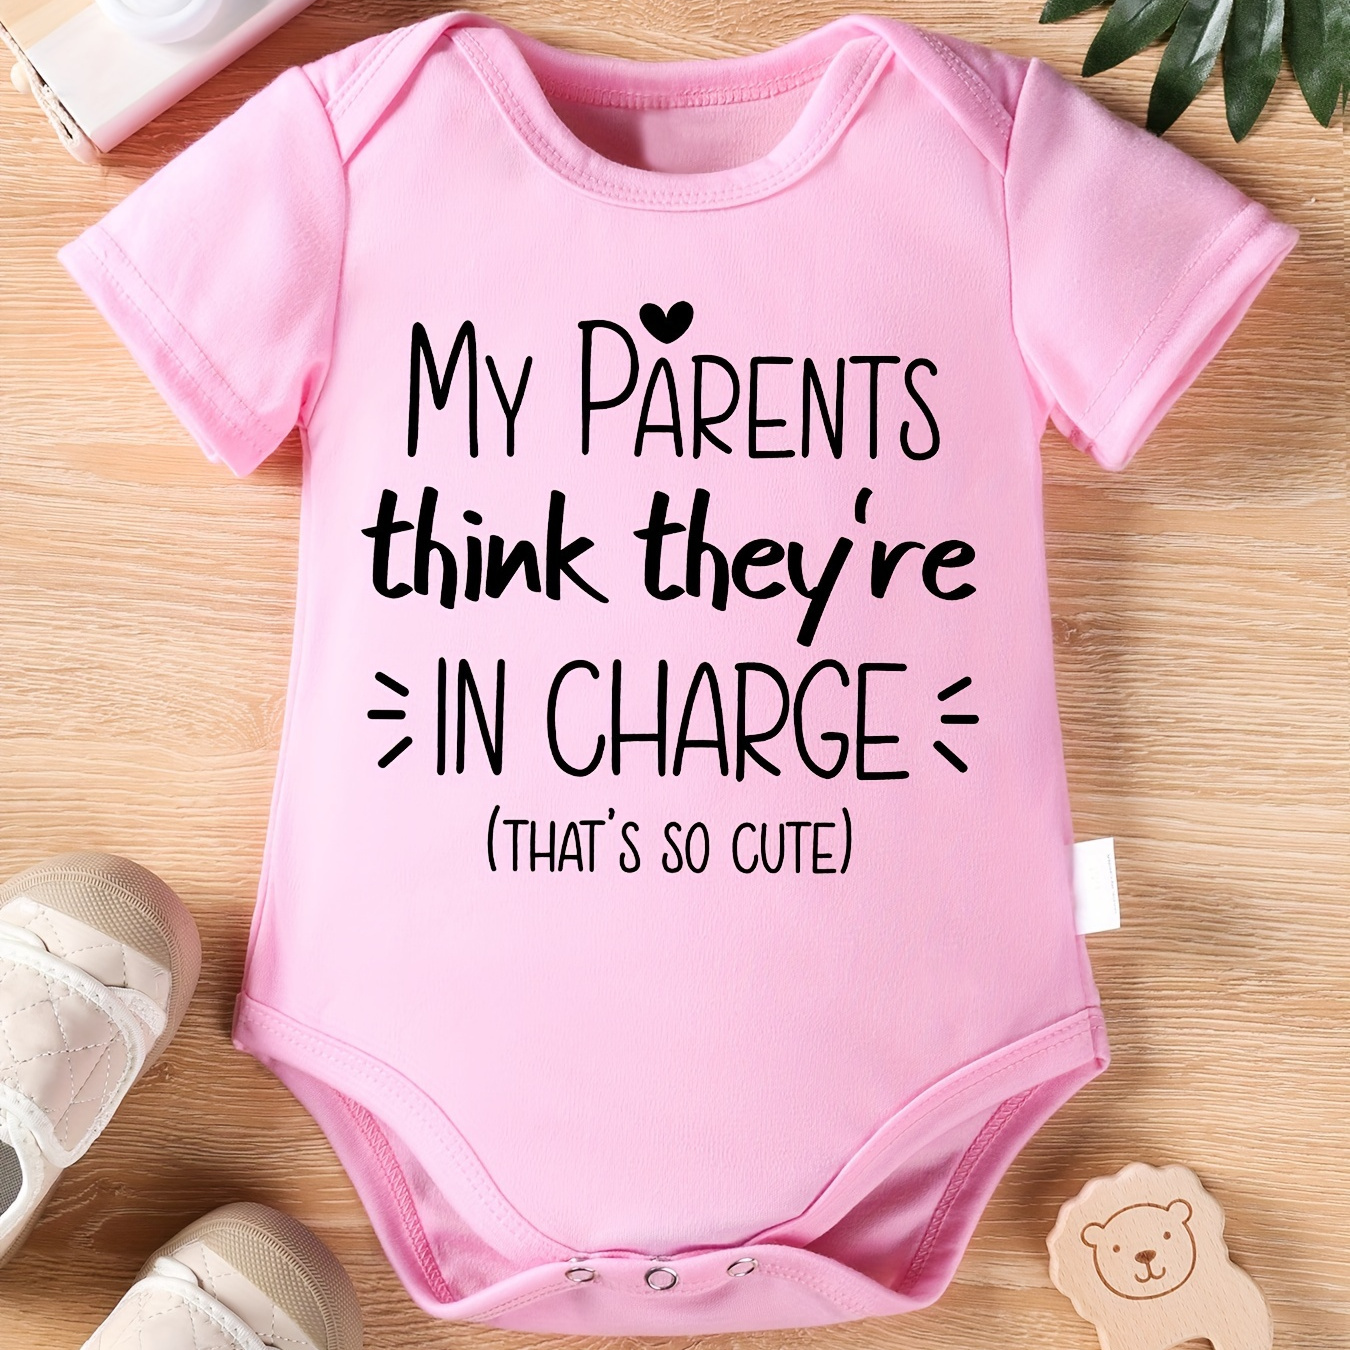 

Baby Girls Triangle Onesie My Parents Think They're In Charge (that's So Cute) Print Newborn Baby Cute Short Sleeve Romper Bodysuit